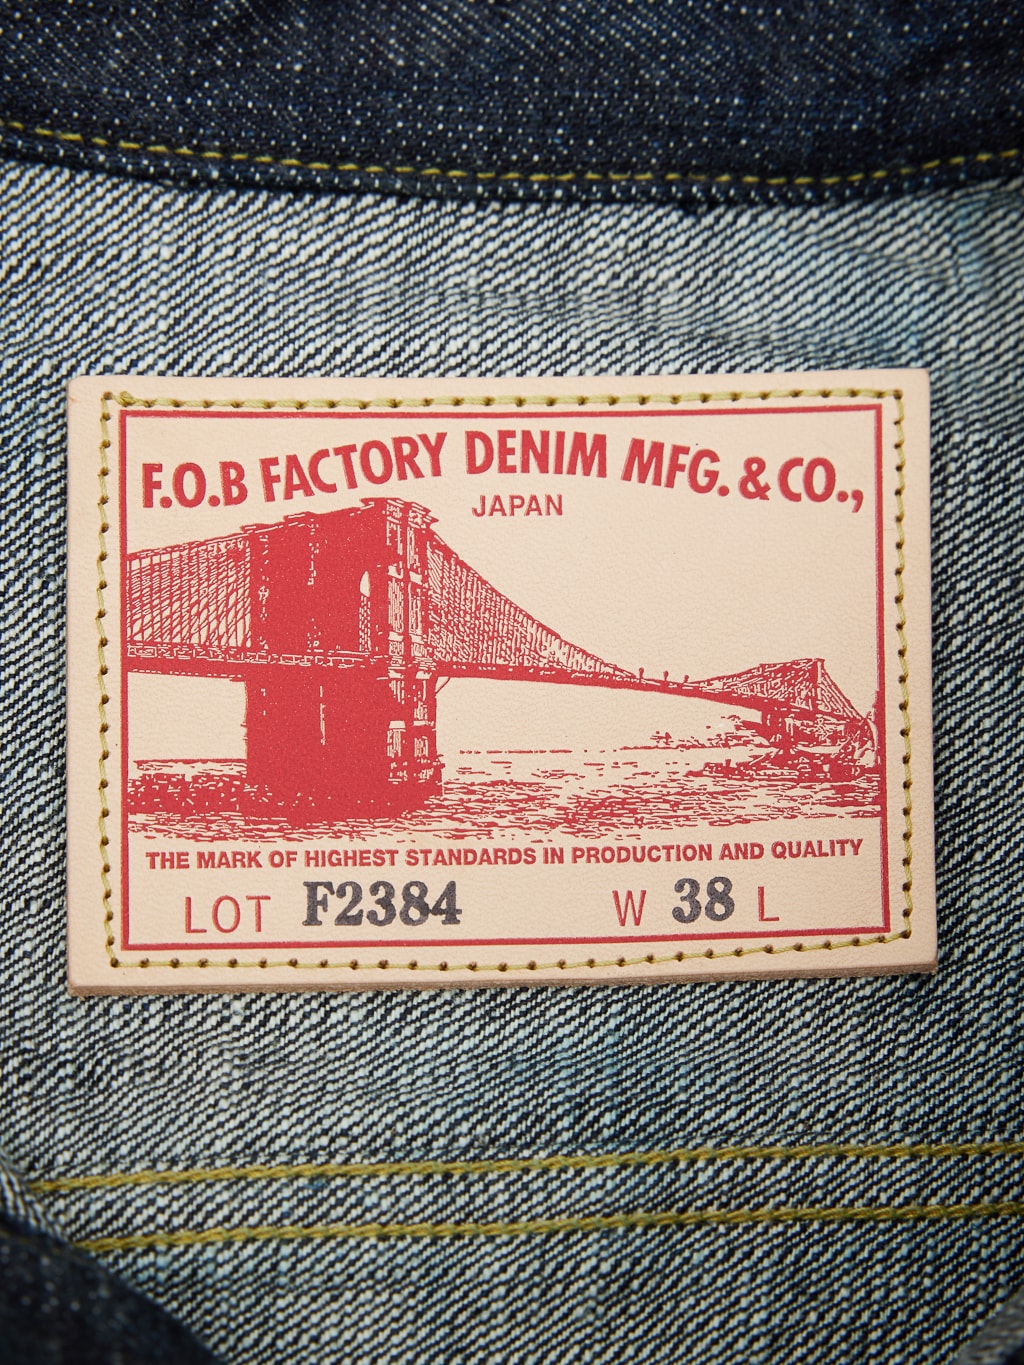 Fob factory denim pullover pocket shirt leather patch